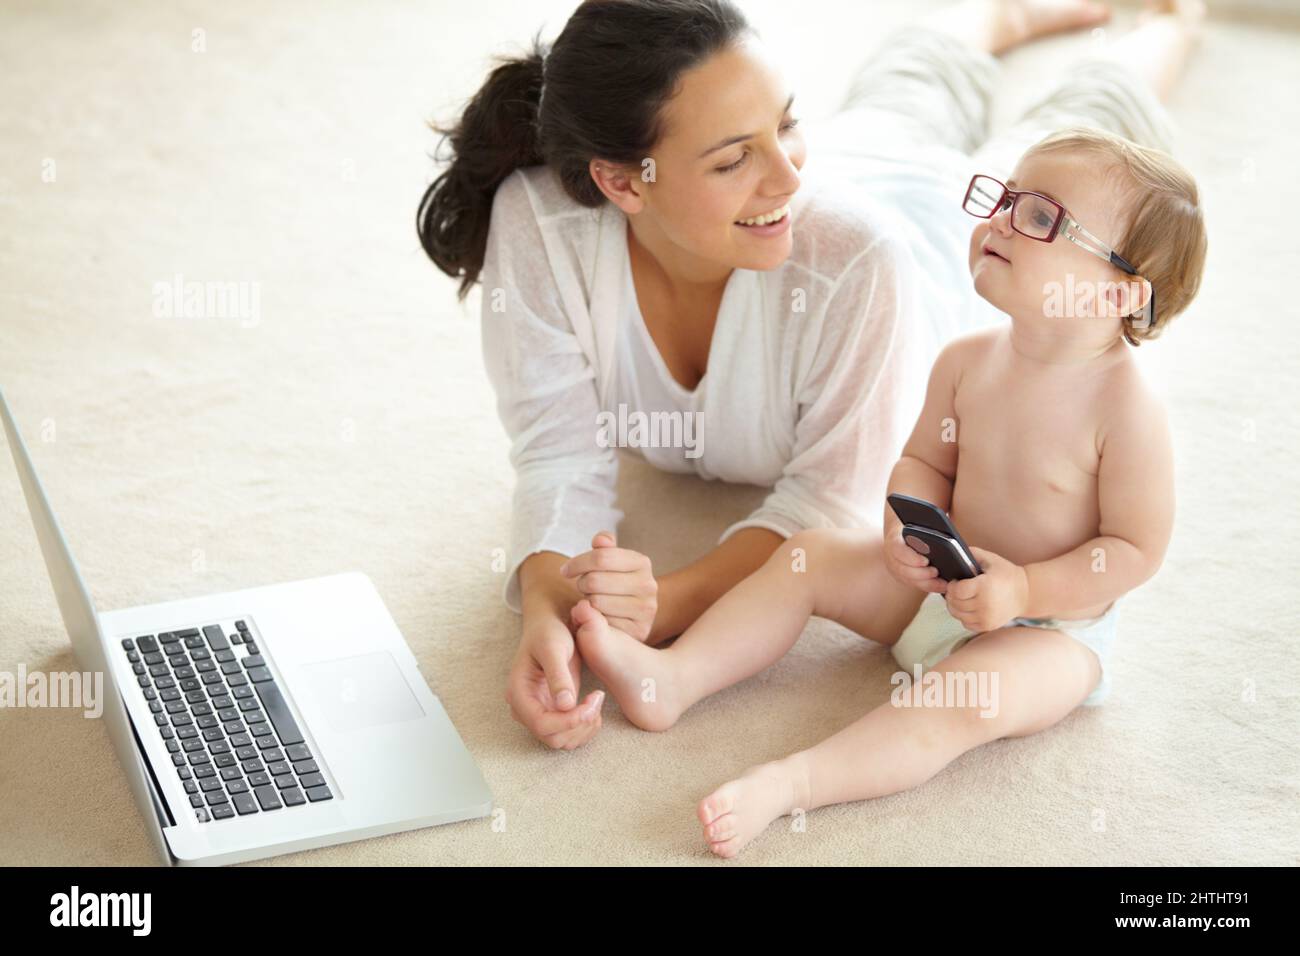 Shes destined for great things. A cute little baby wearing her mothers glasses and holding a cellphone while sitting in front of a laptop. Stock Photo